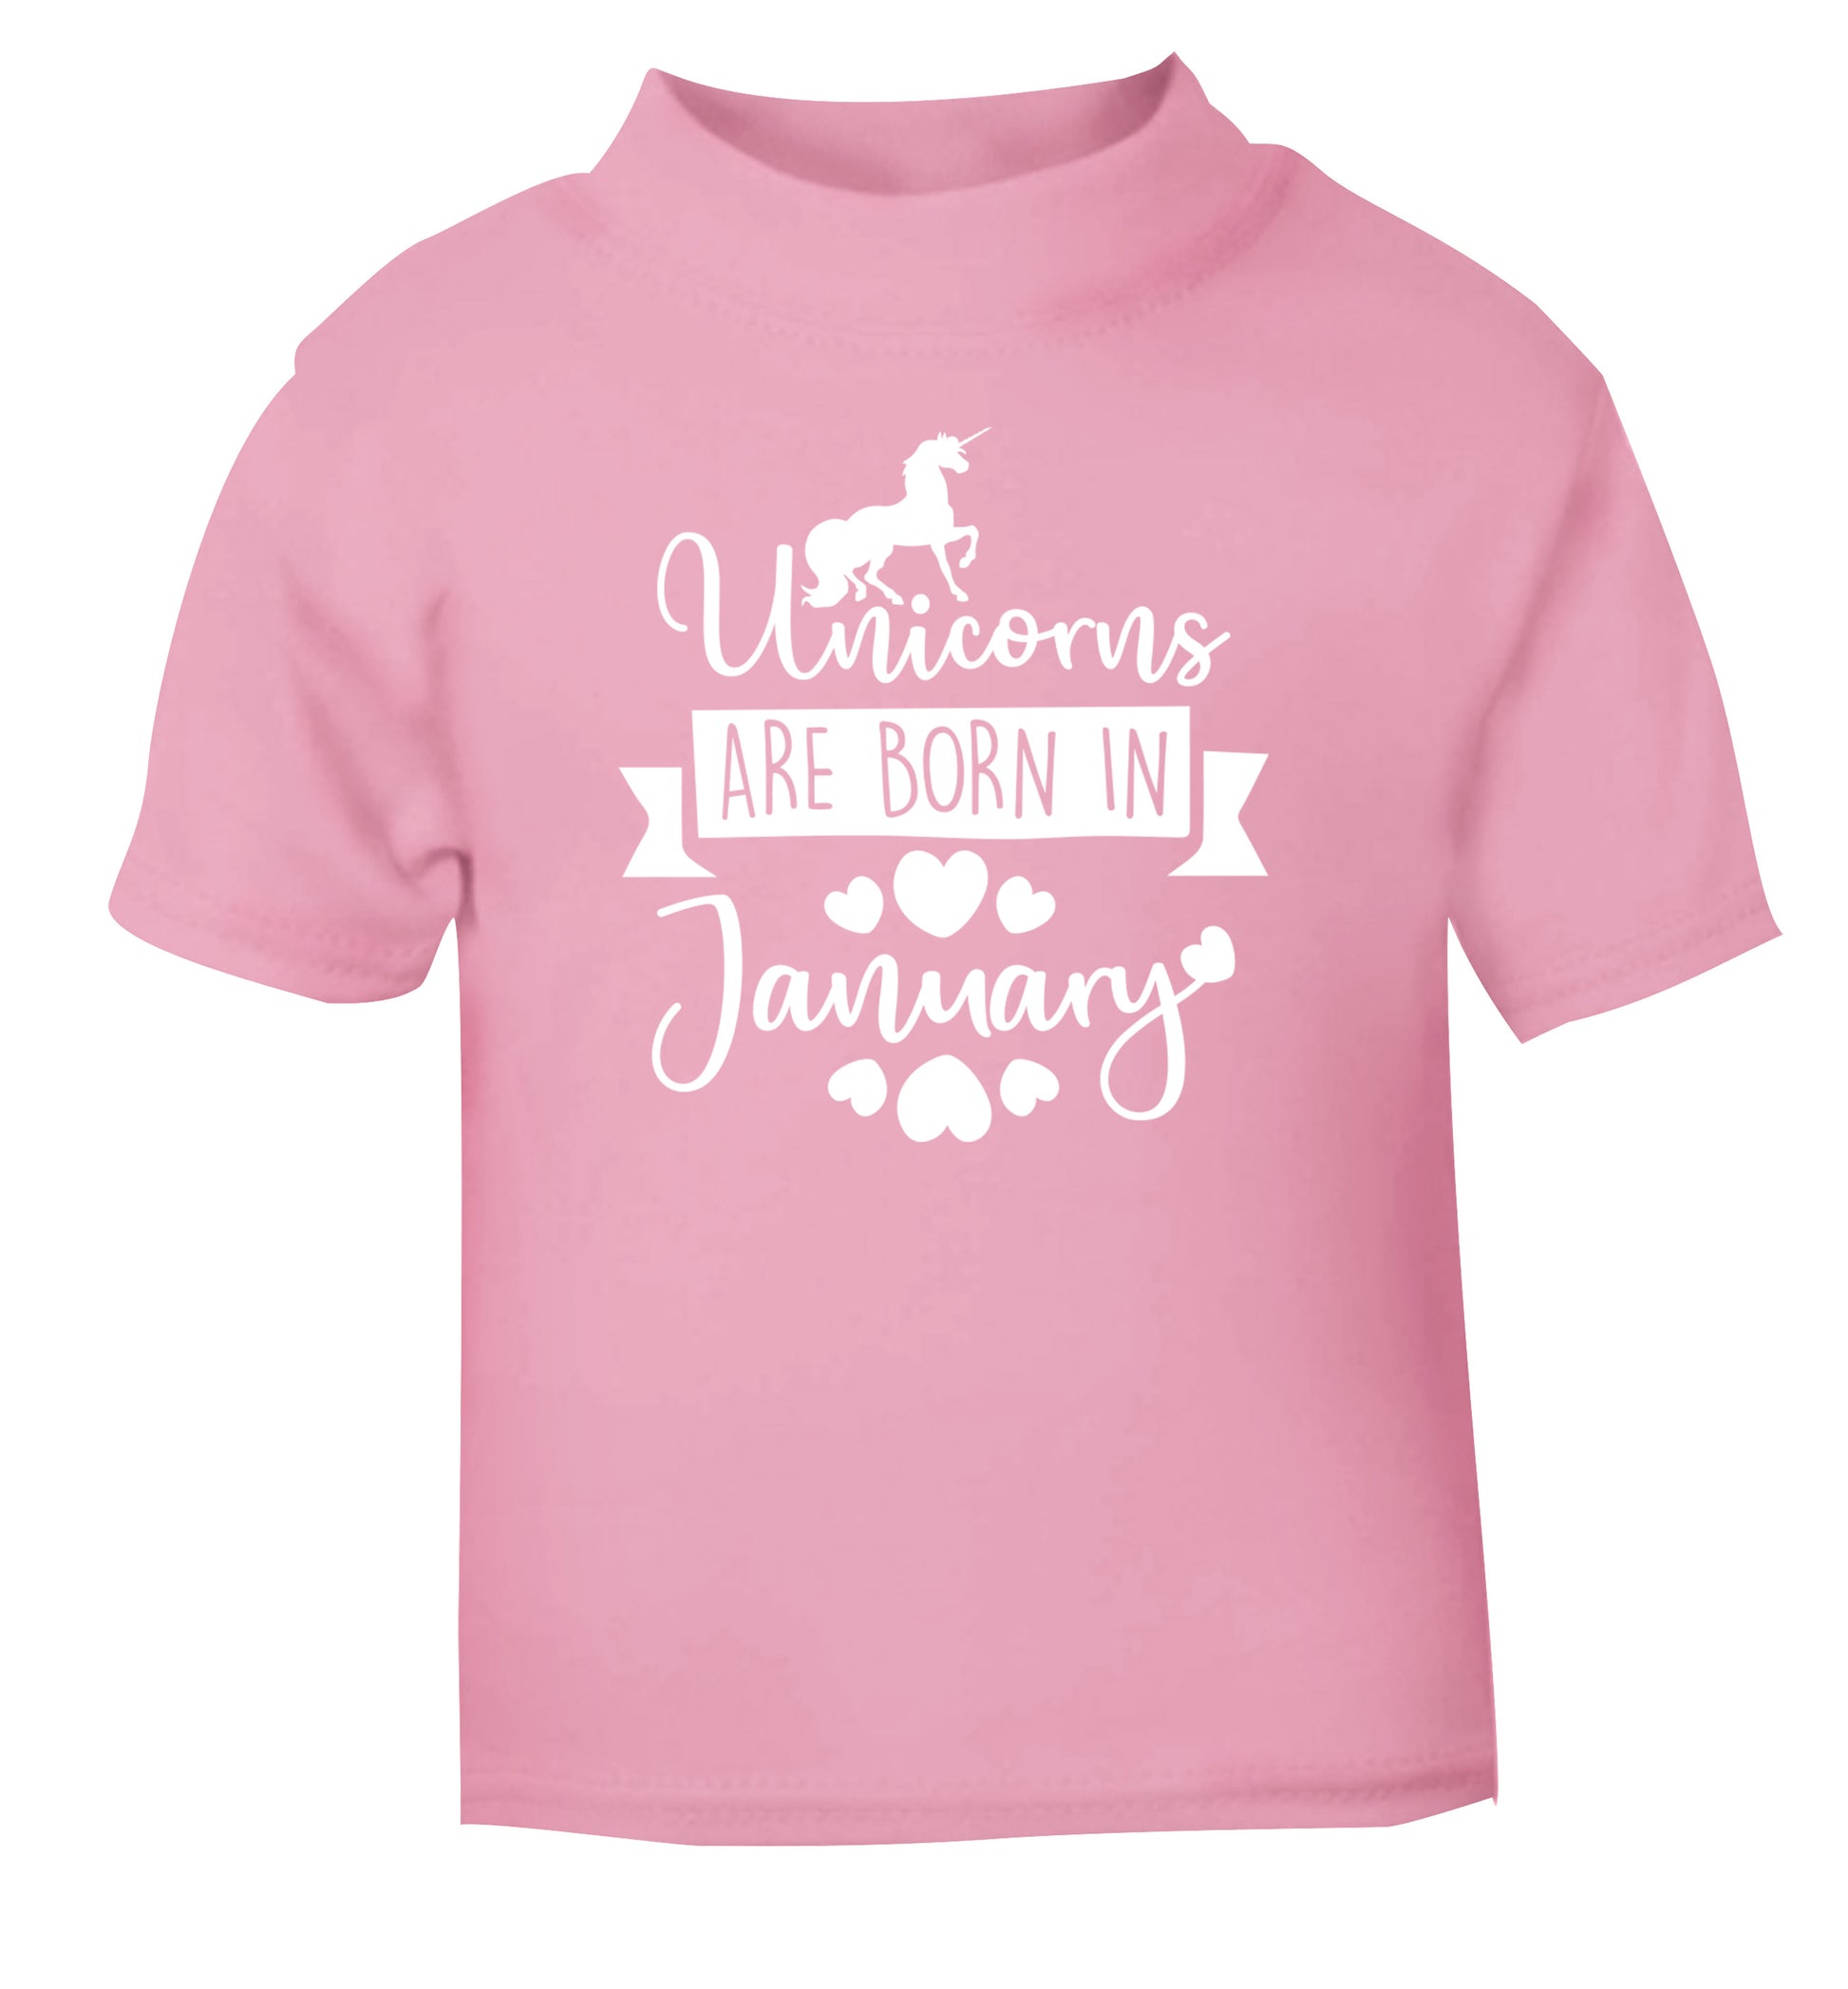 Unicorns are born in January light pink Baby Toddler Tshirt 2 Years